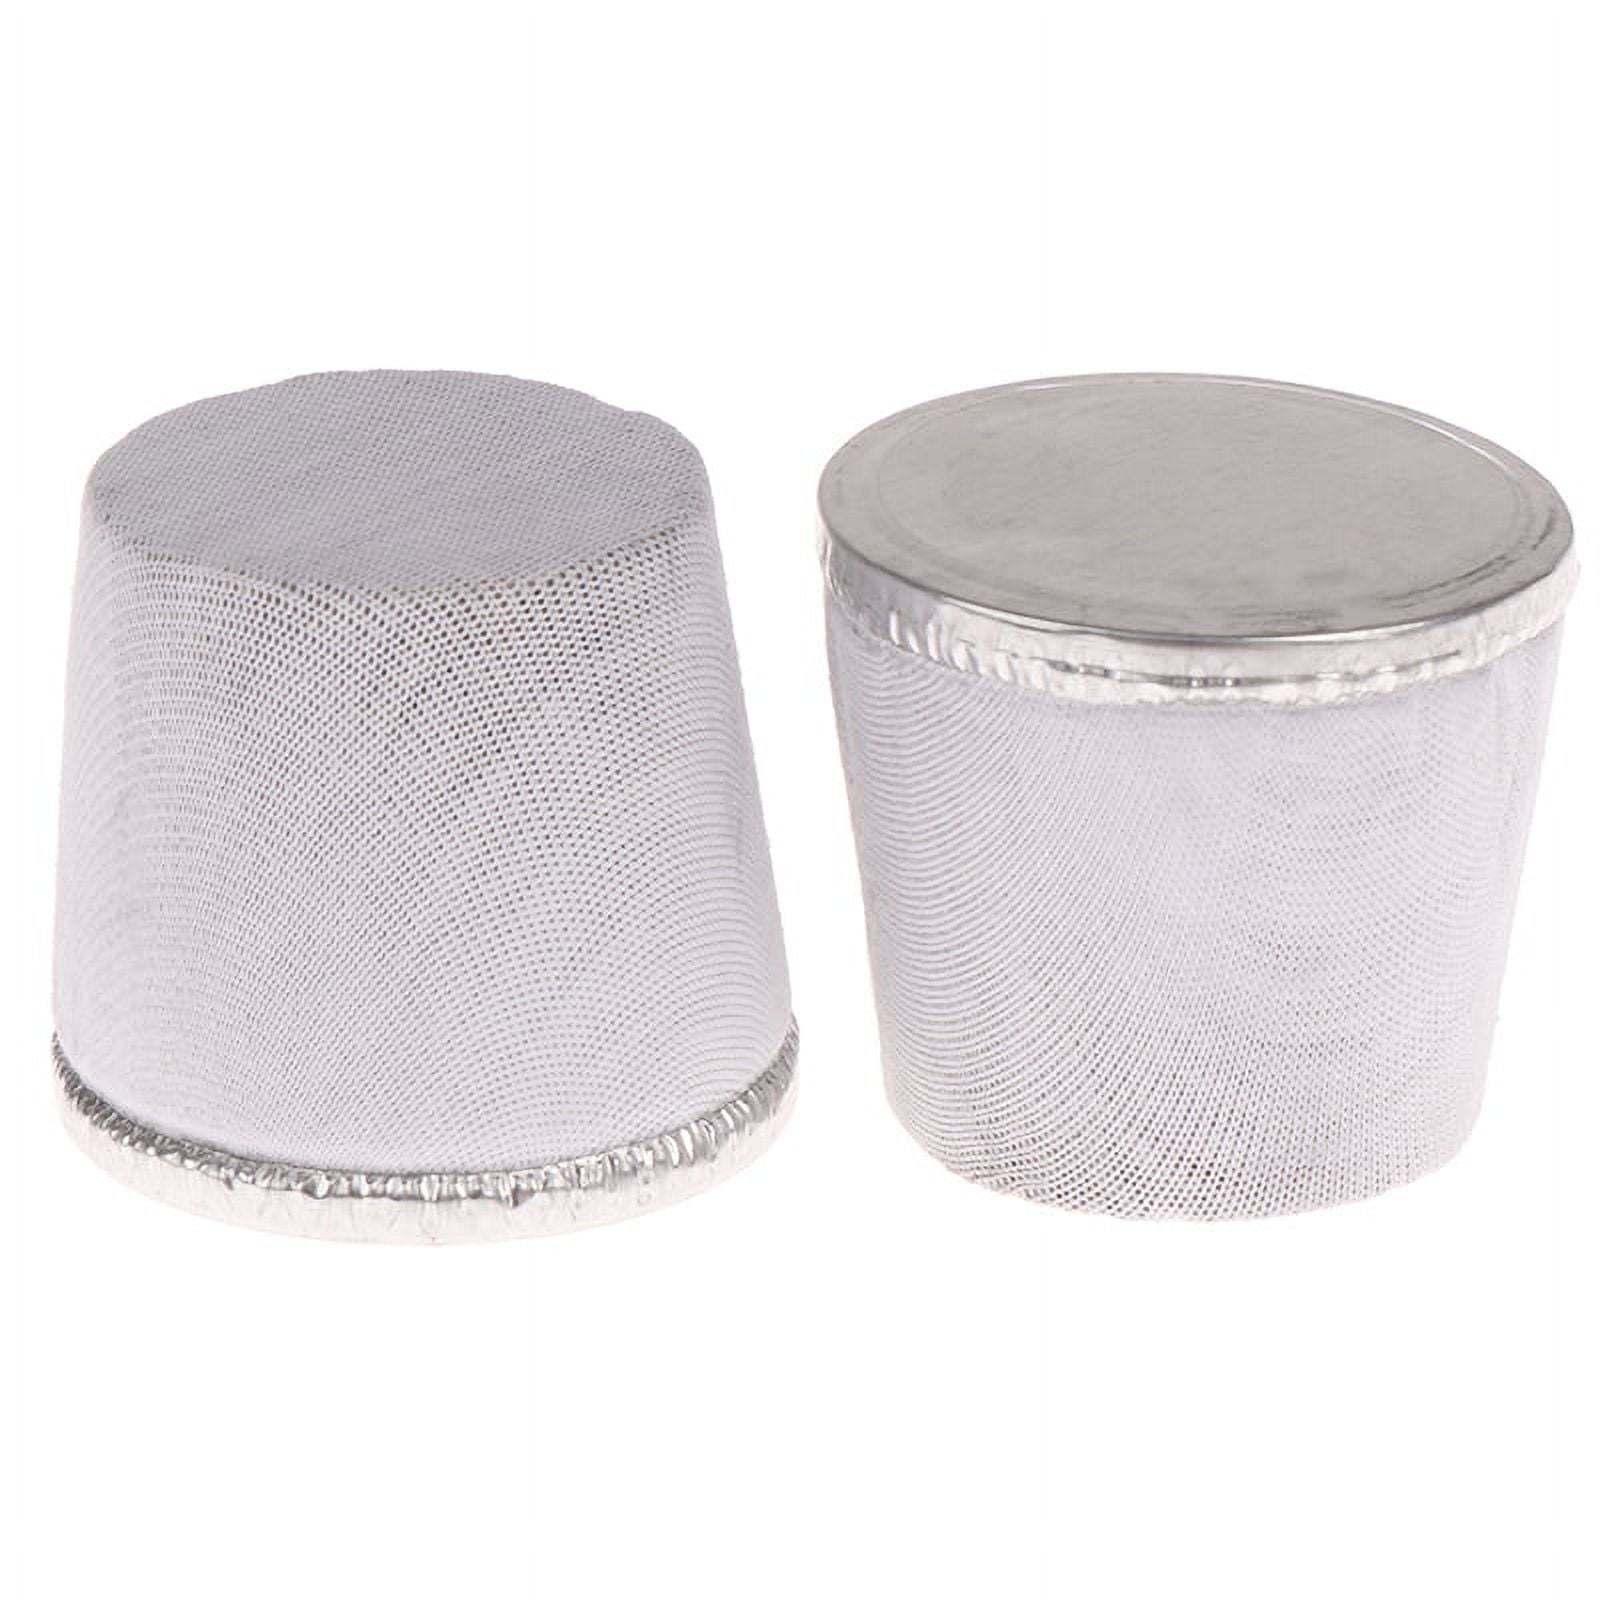  2 Pcs Thermos Bottle Cork Plug Lid Cap Stopper Tapered